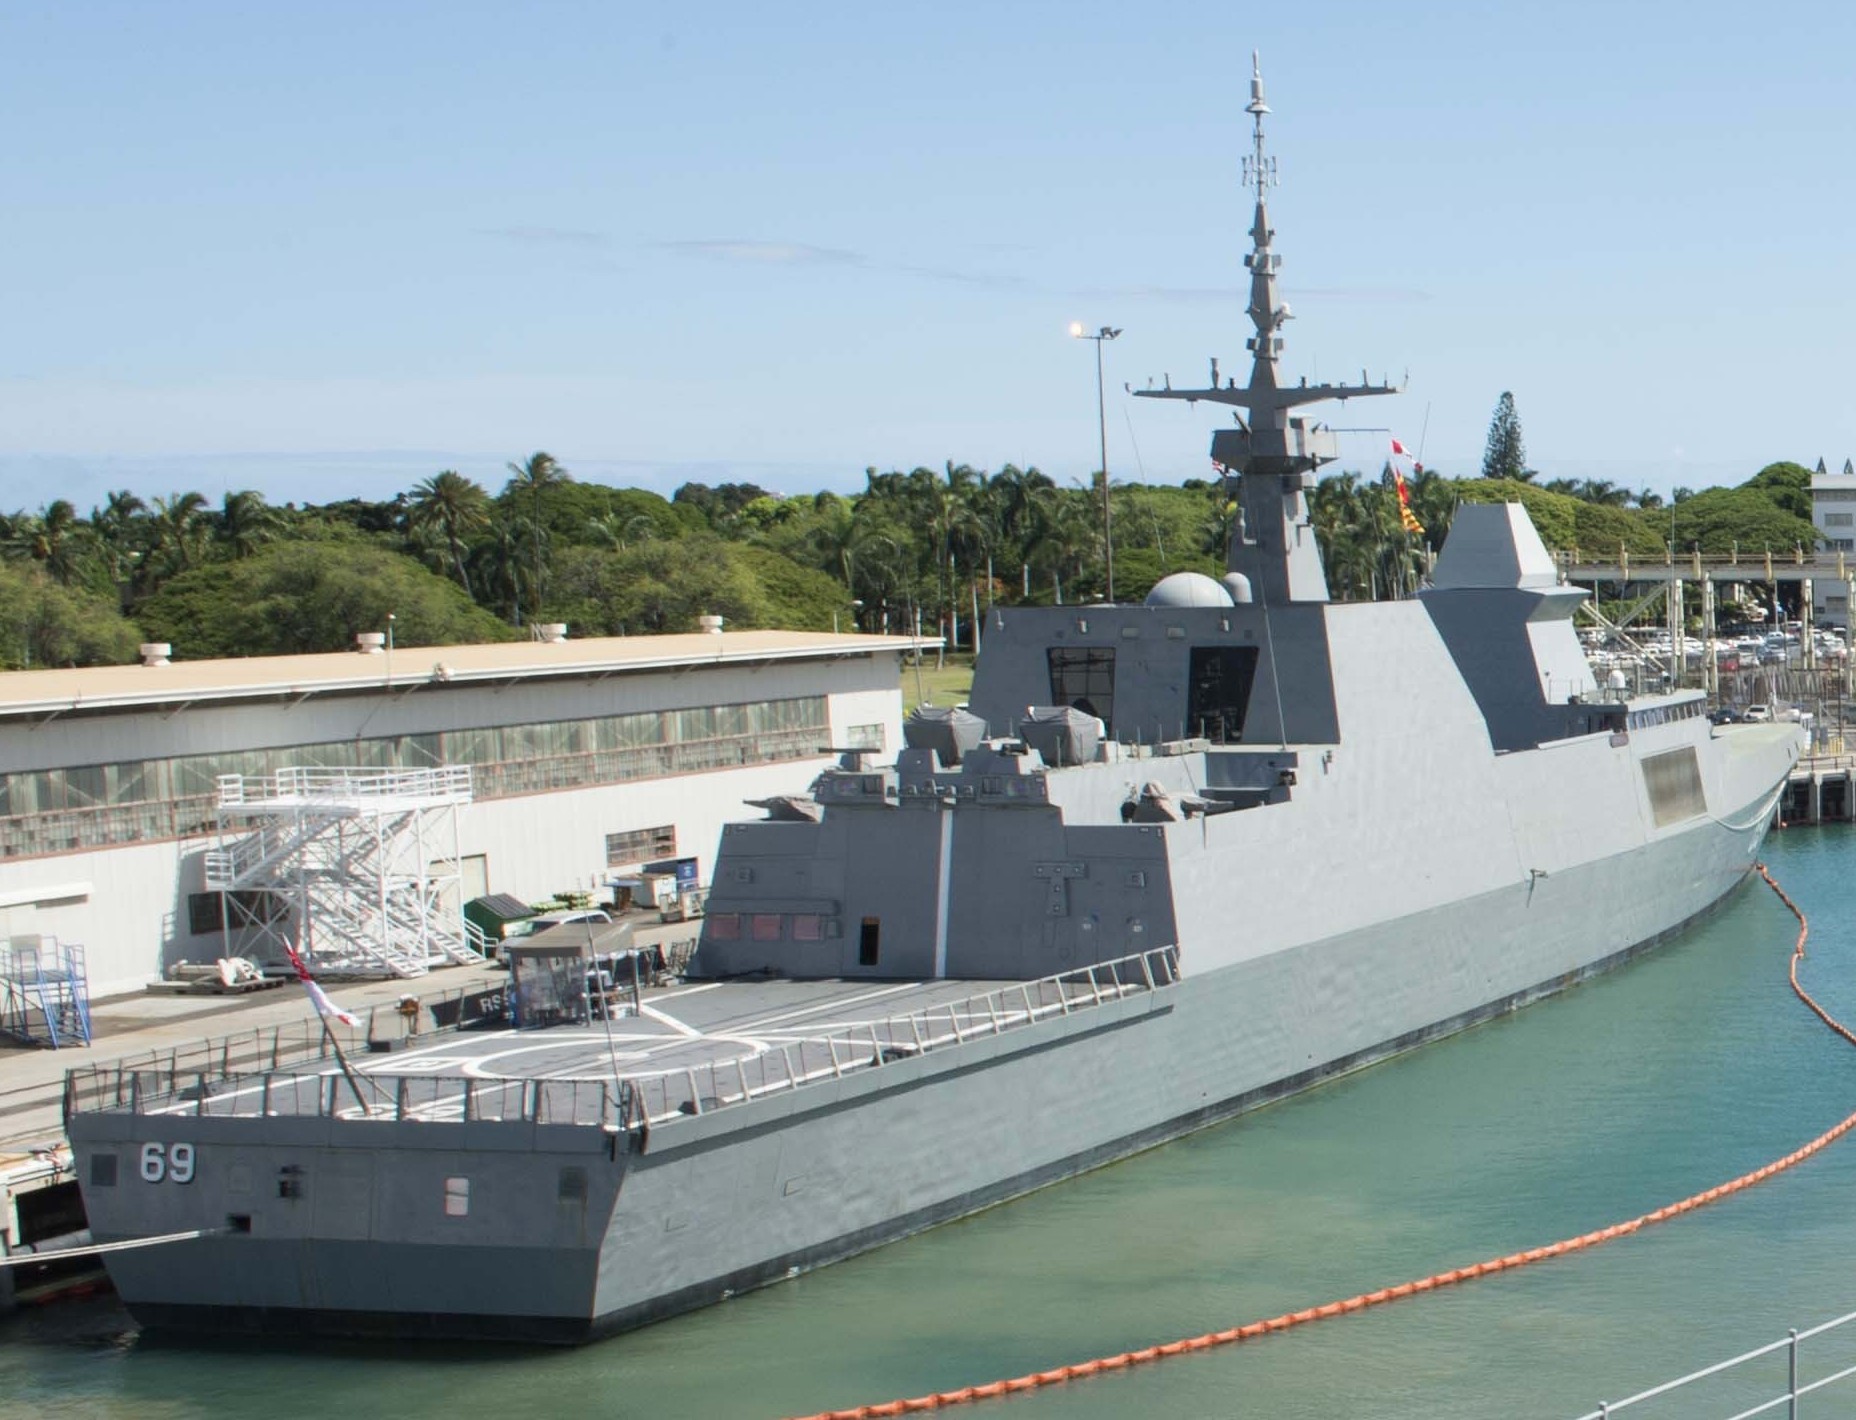 69 rss intrepid formidable class multi-mission missile frigate ffg republic singapore navy 12